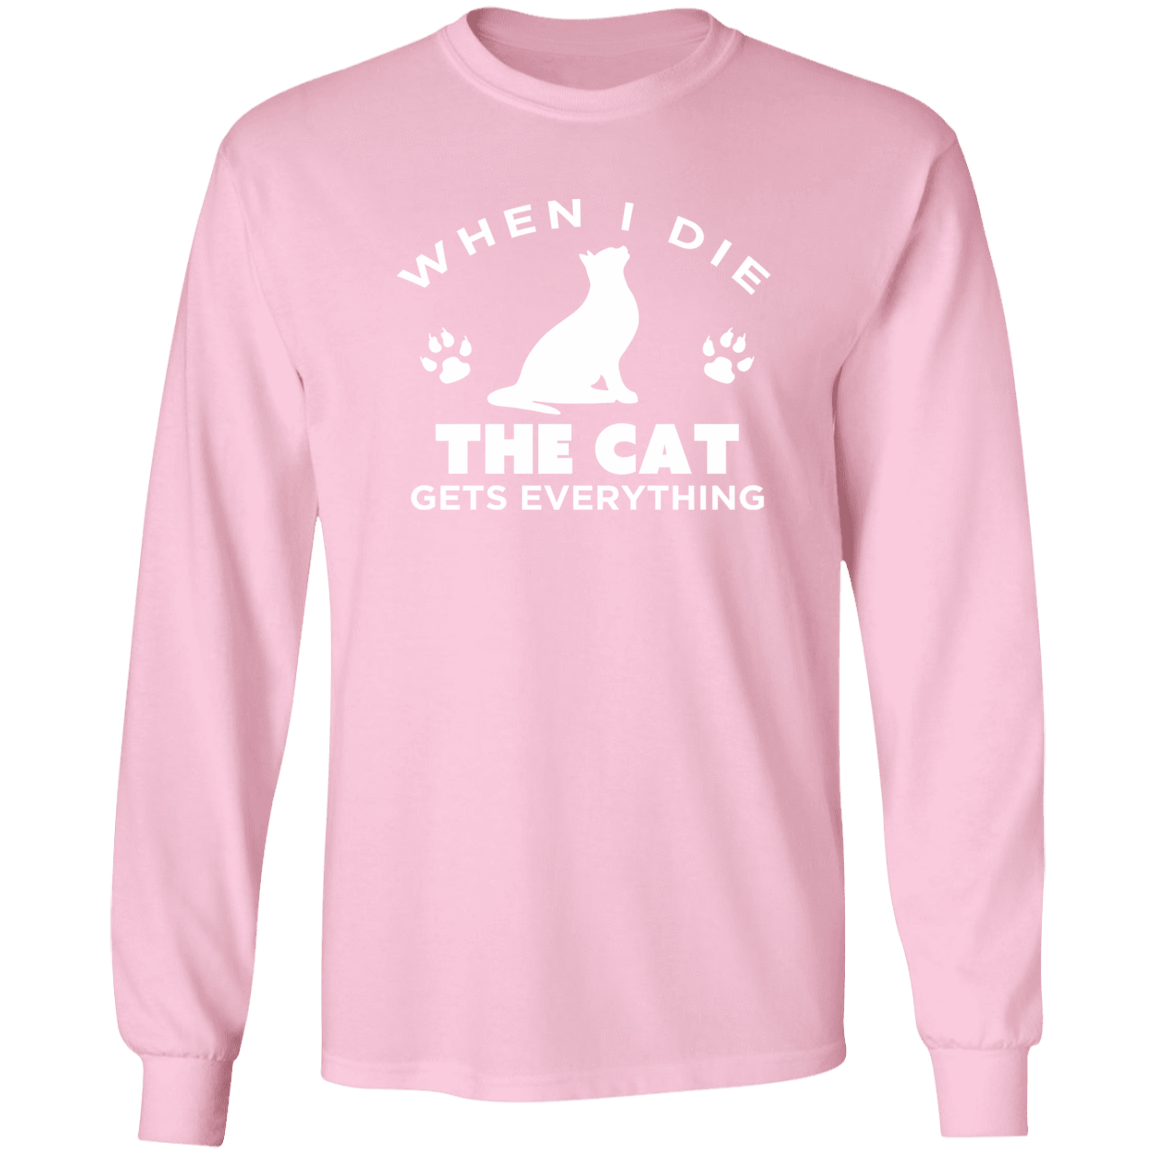 When I Die The Cat Gets Everything - Long Sleeve T Shirt.